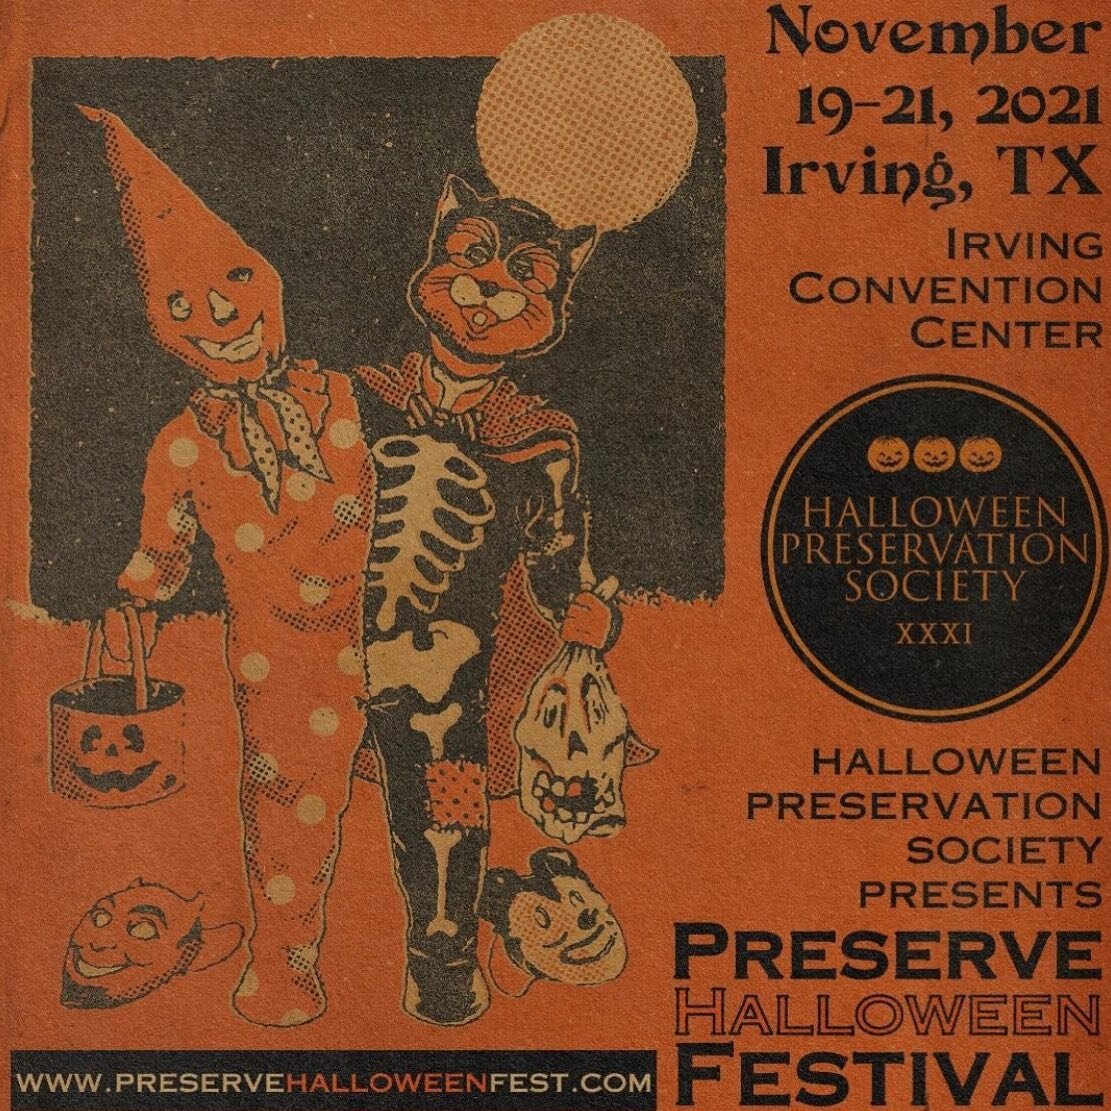 🎃 BIG NEWS! 🎃

@marvelandmoon will be at the @preservehalloween festival this fall! 

I'm super excited for this weekend of Halloween fun in November! A great way to keep the party going &amp; beat those post-Halloween blues! 

Texas folk, will you